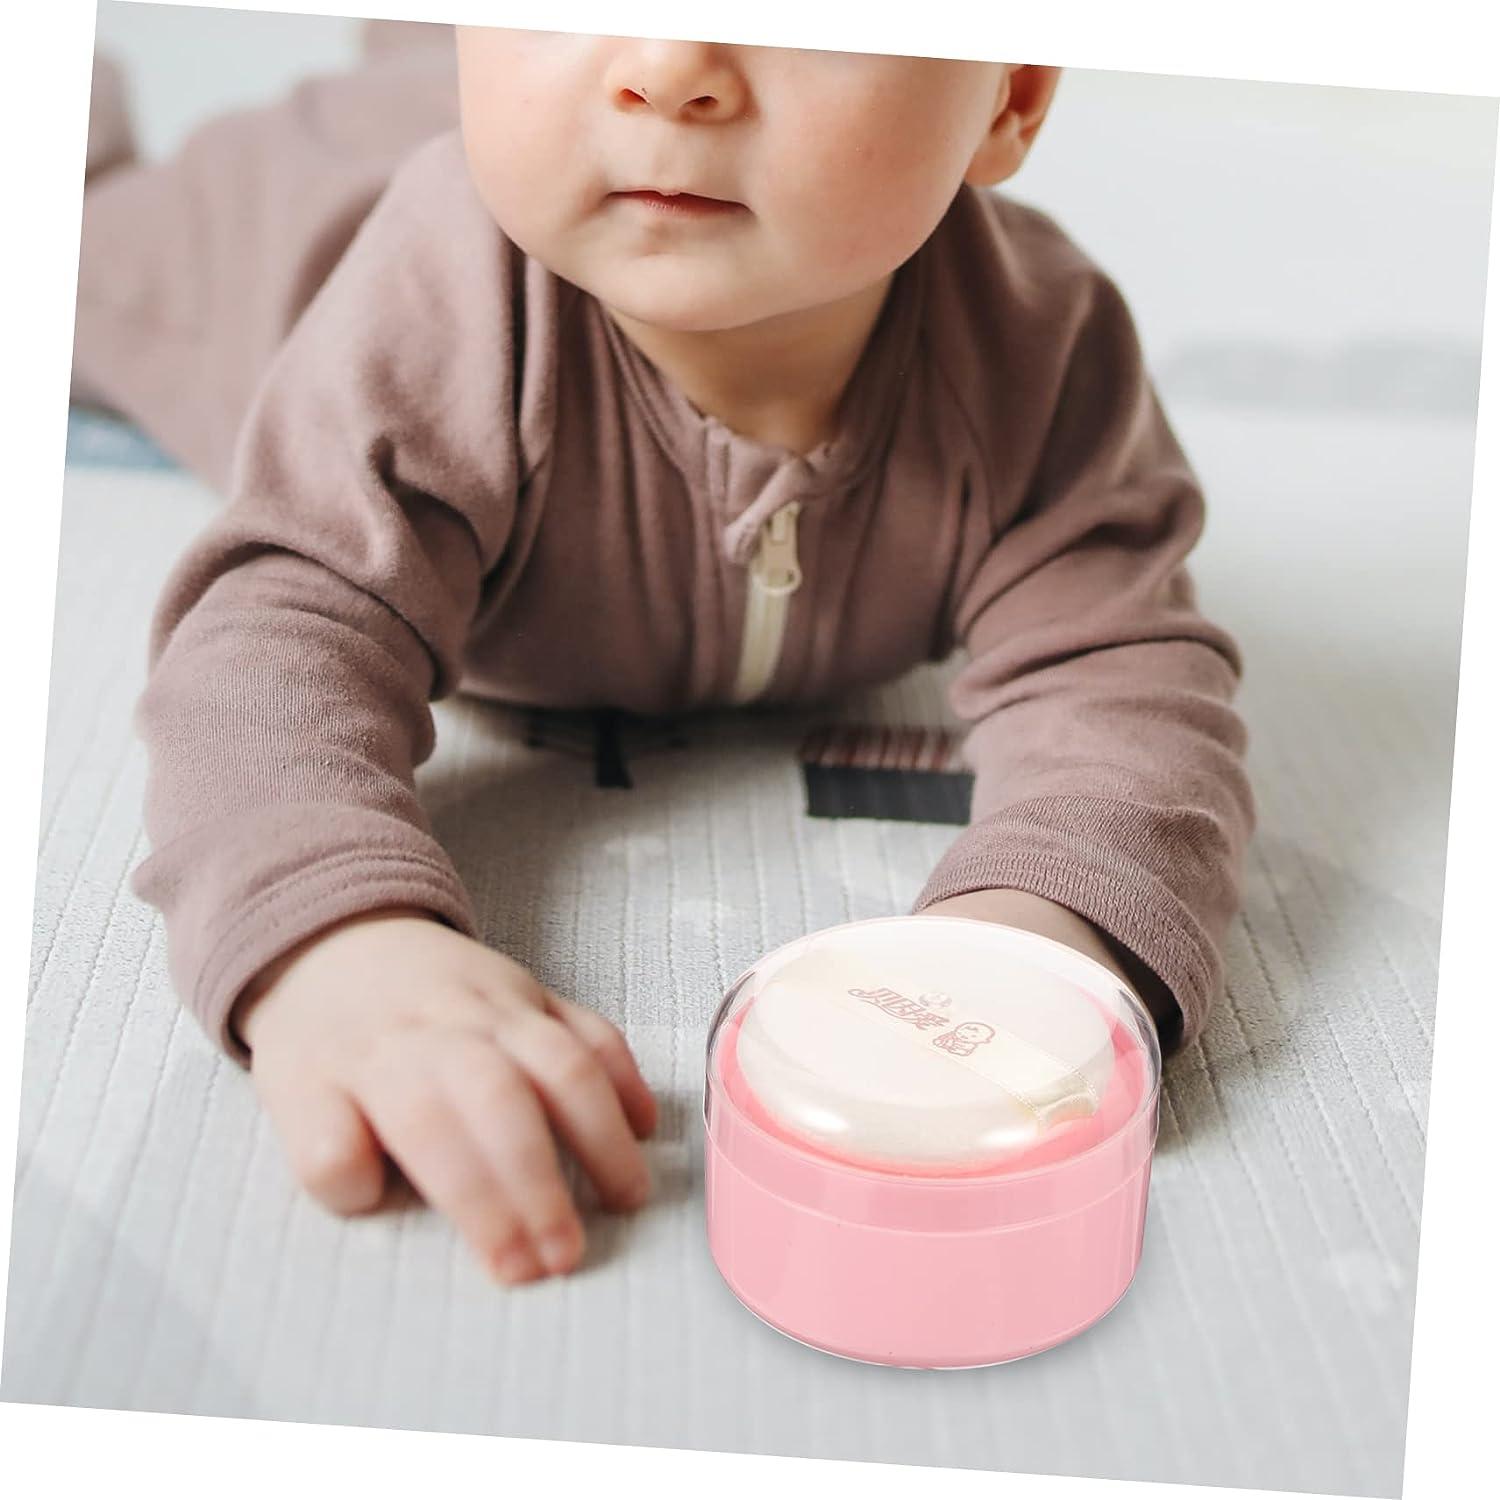 BPA Free Baby Powder Puff Box, Baby Care Face, Makeup Cosmetic Talcum  Powder Container with Hand Holder